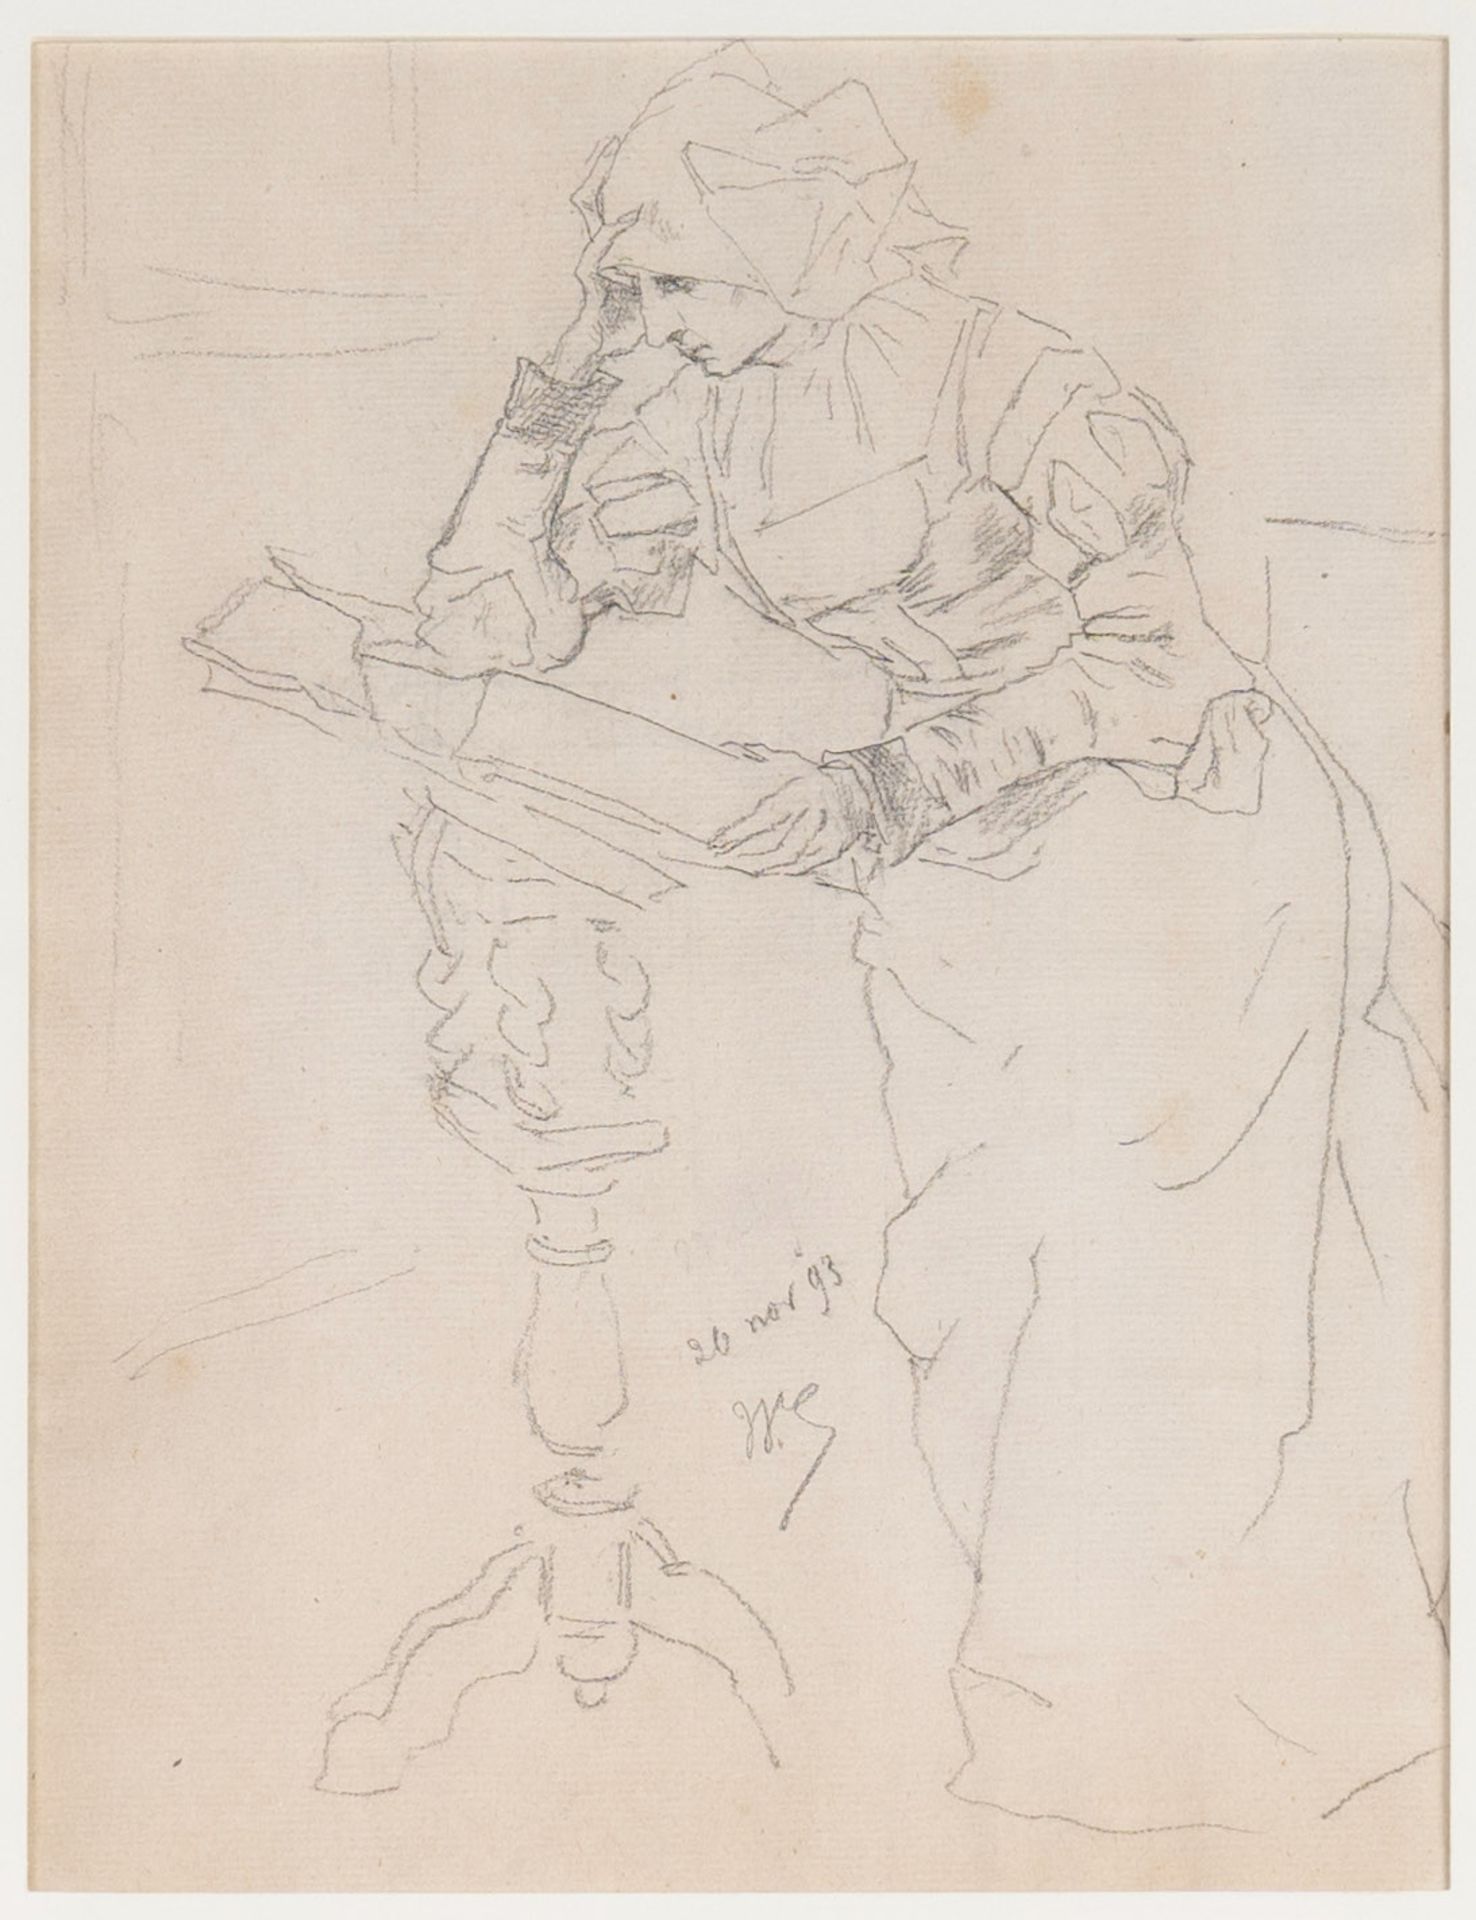 Willem Geets (1838-1919): The reading lady, pencil on paper, dated (18)93